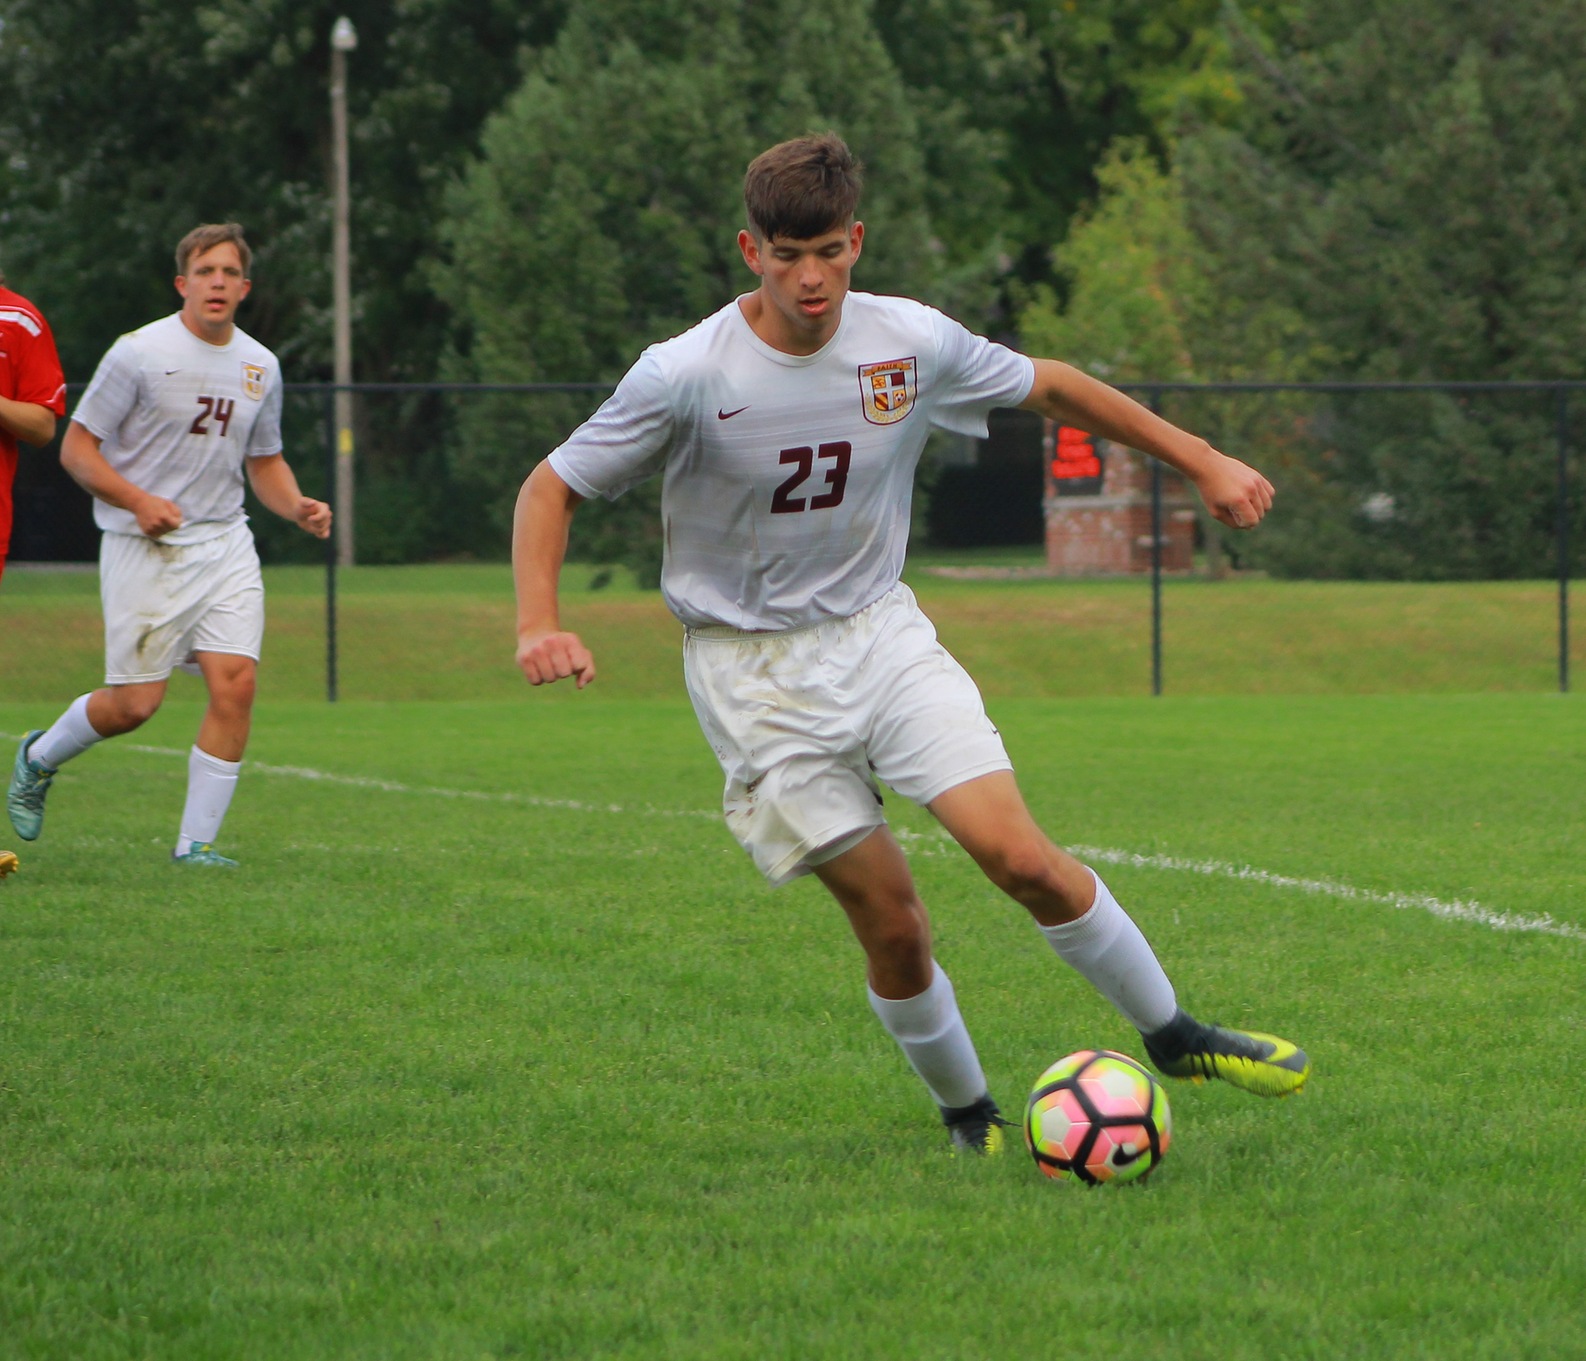 Daniel Guess led the Eagles with two assists in a win over Union College